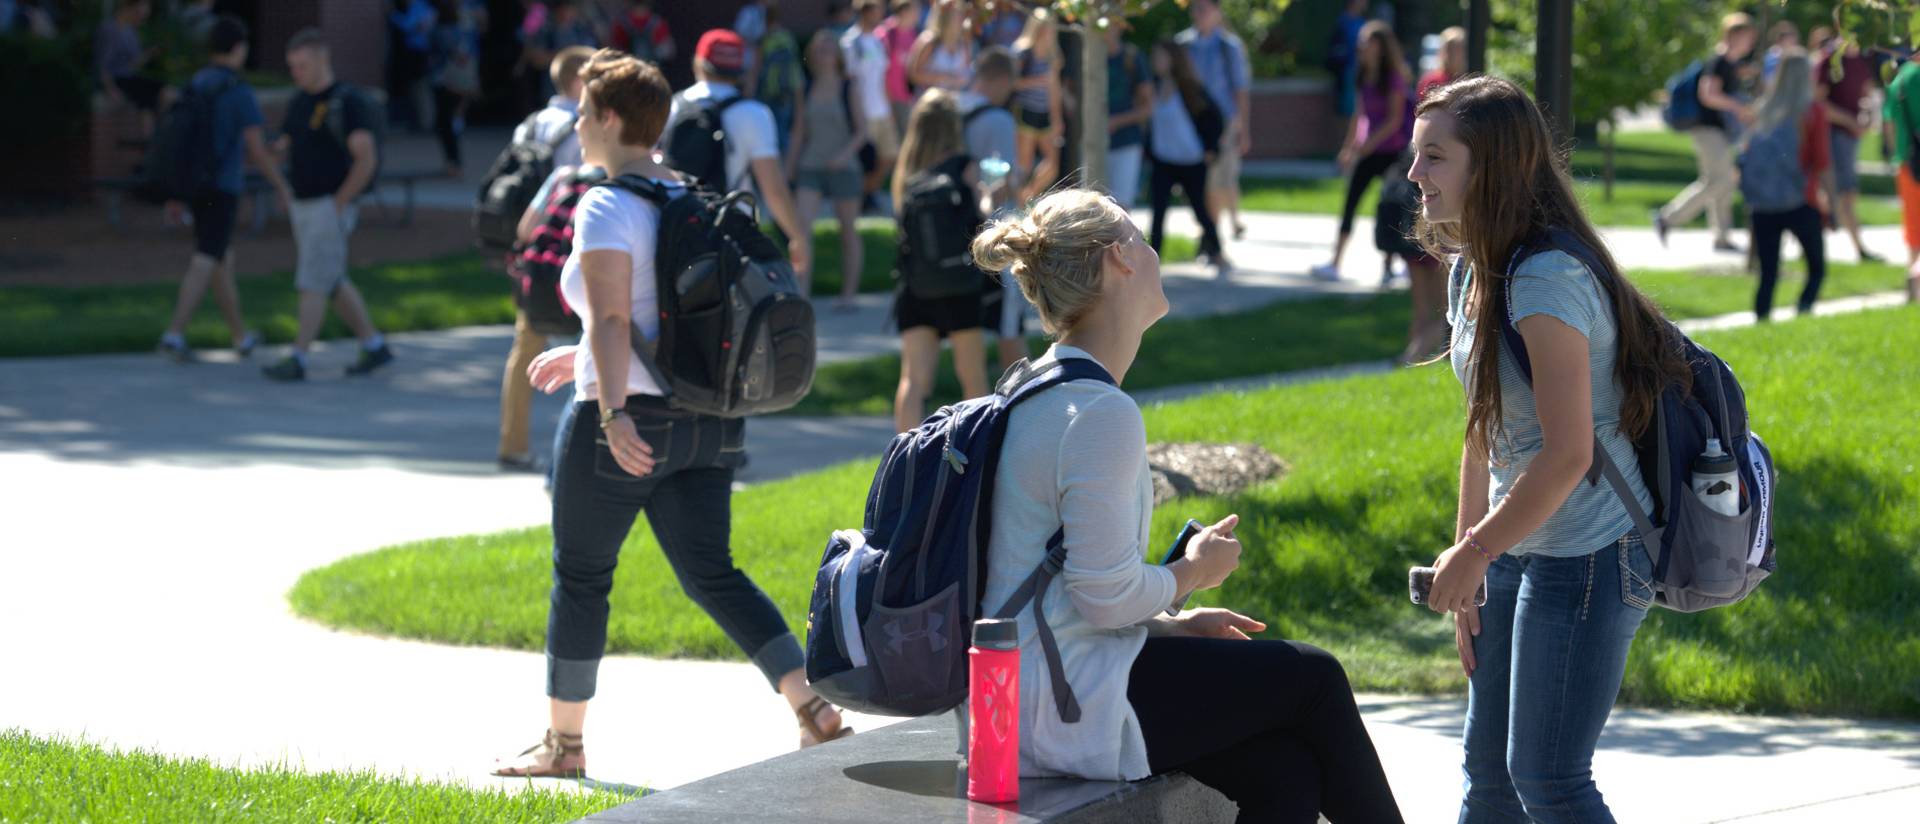 Students catch up on the first day of classes.